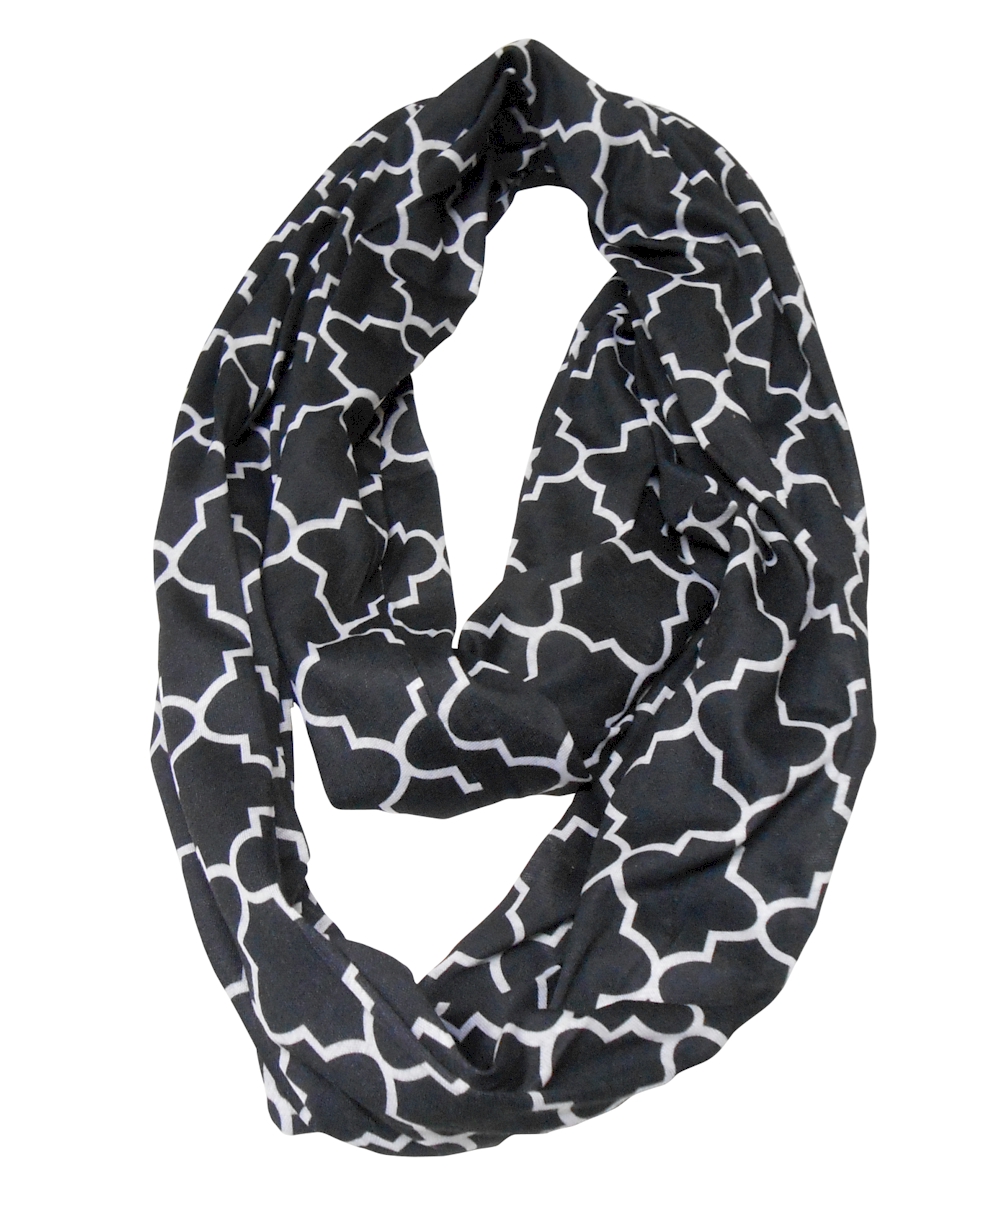 Quatrefoil Jersey Knit Infinity Scarf Embroidery Blanks - BLACK - CLOSEOUT